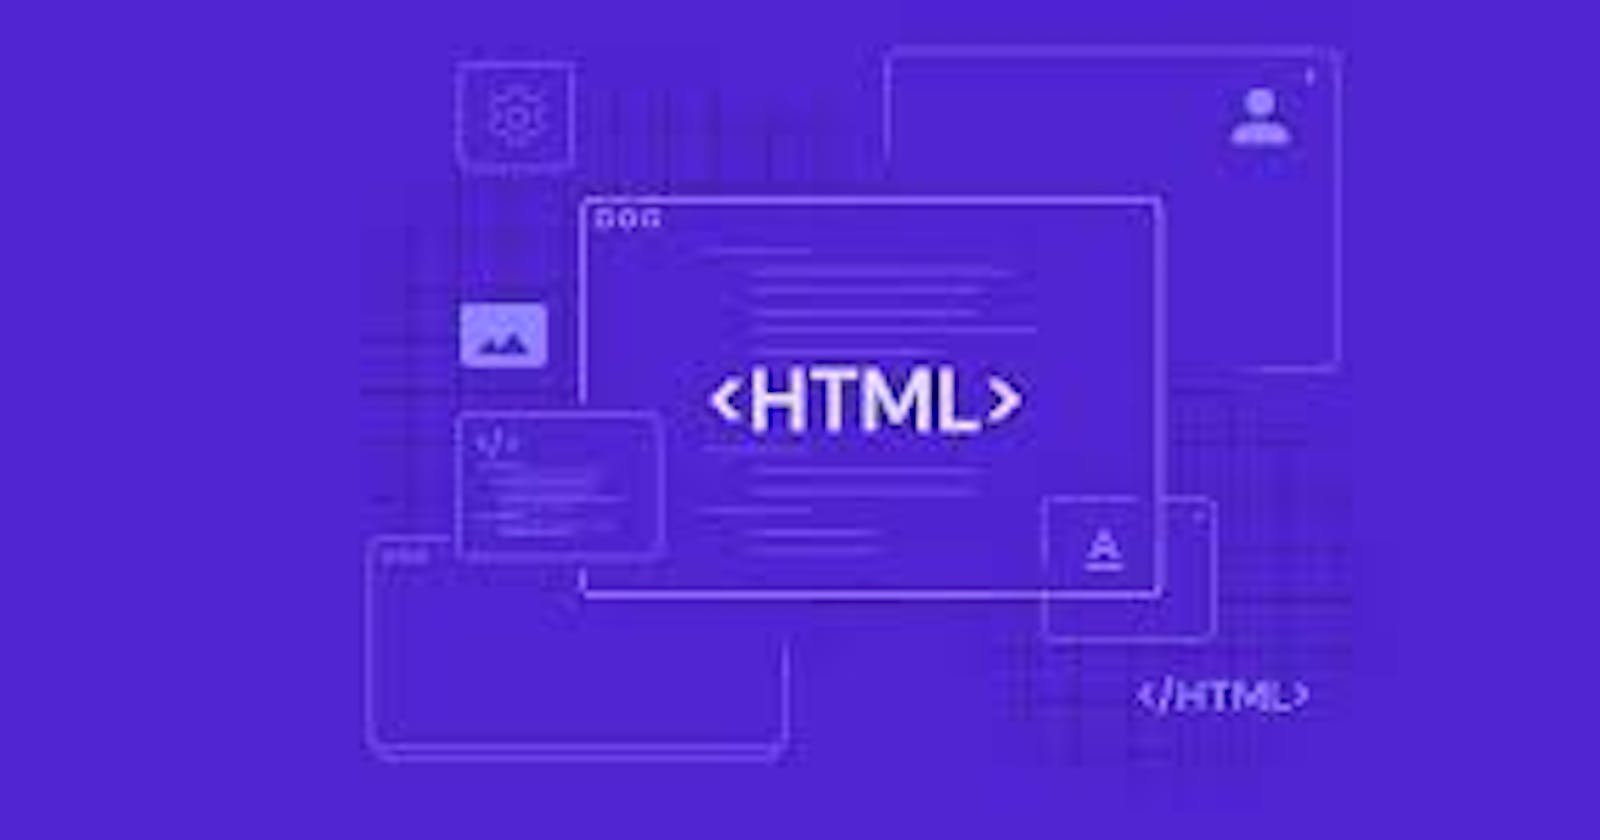 Types of Elements in HTML.